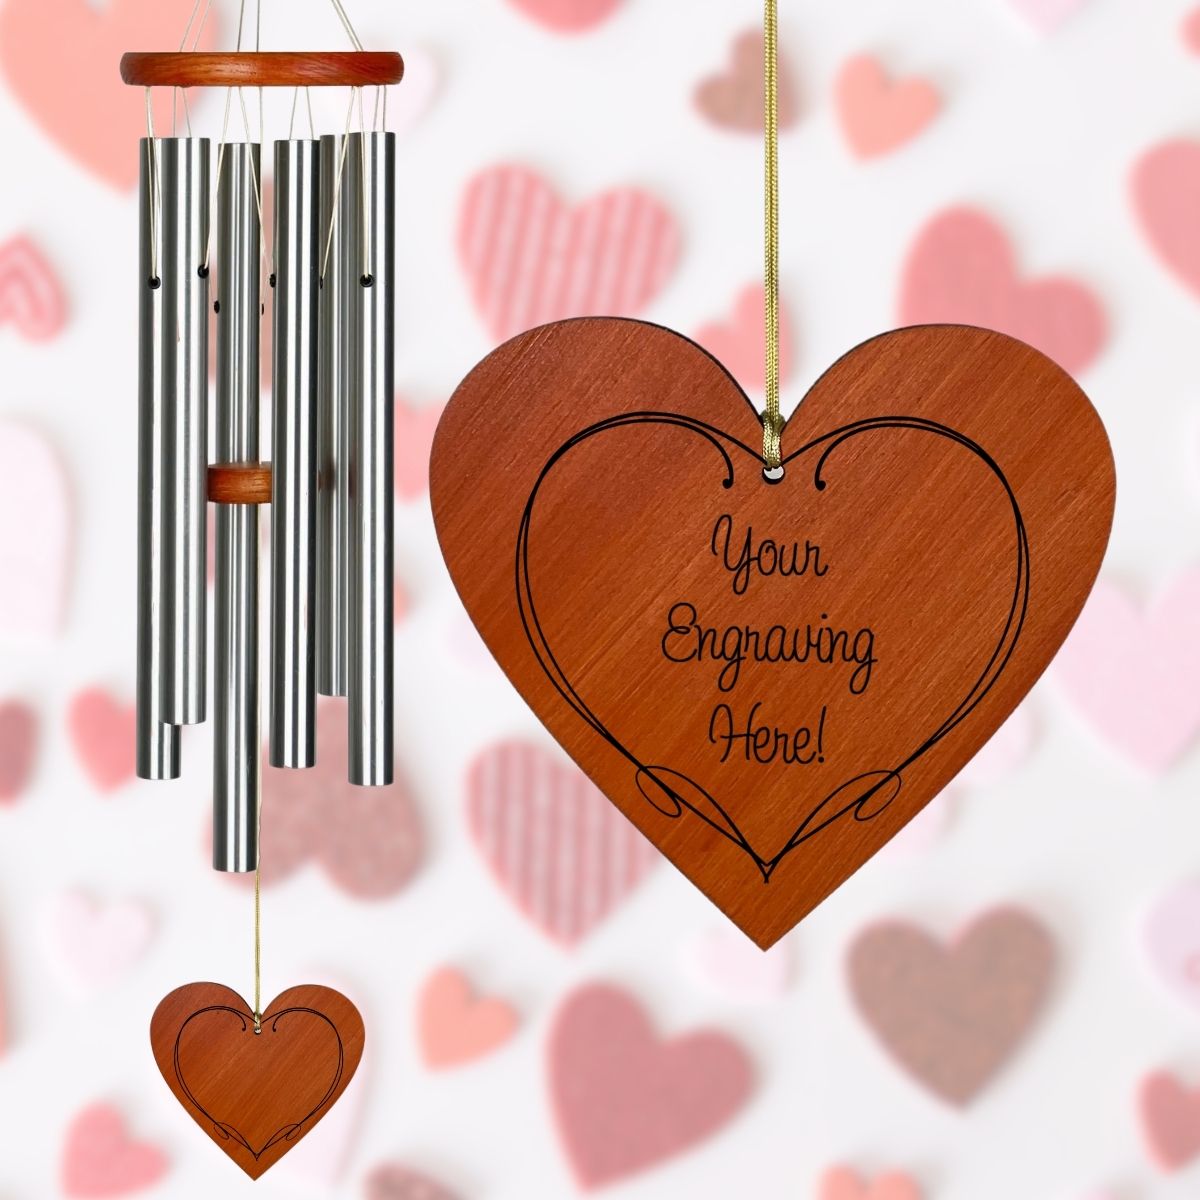 Amazing Grace 25 Inch Silver Wind Chime - Engravable Regal Heart Sail